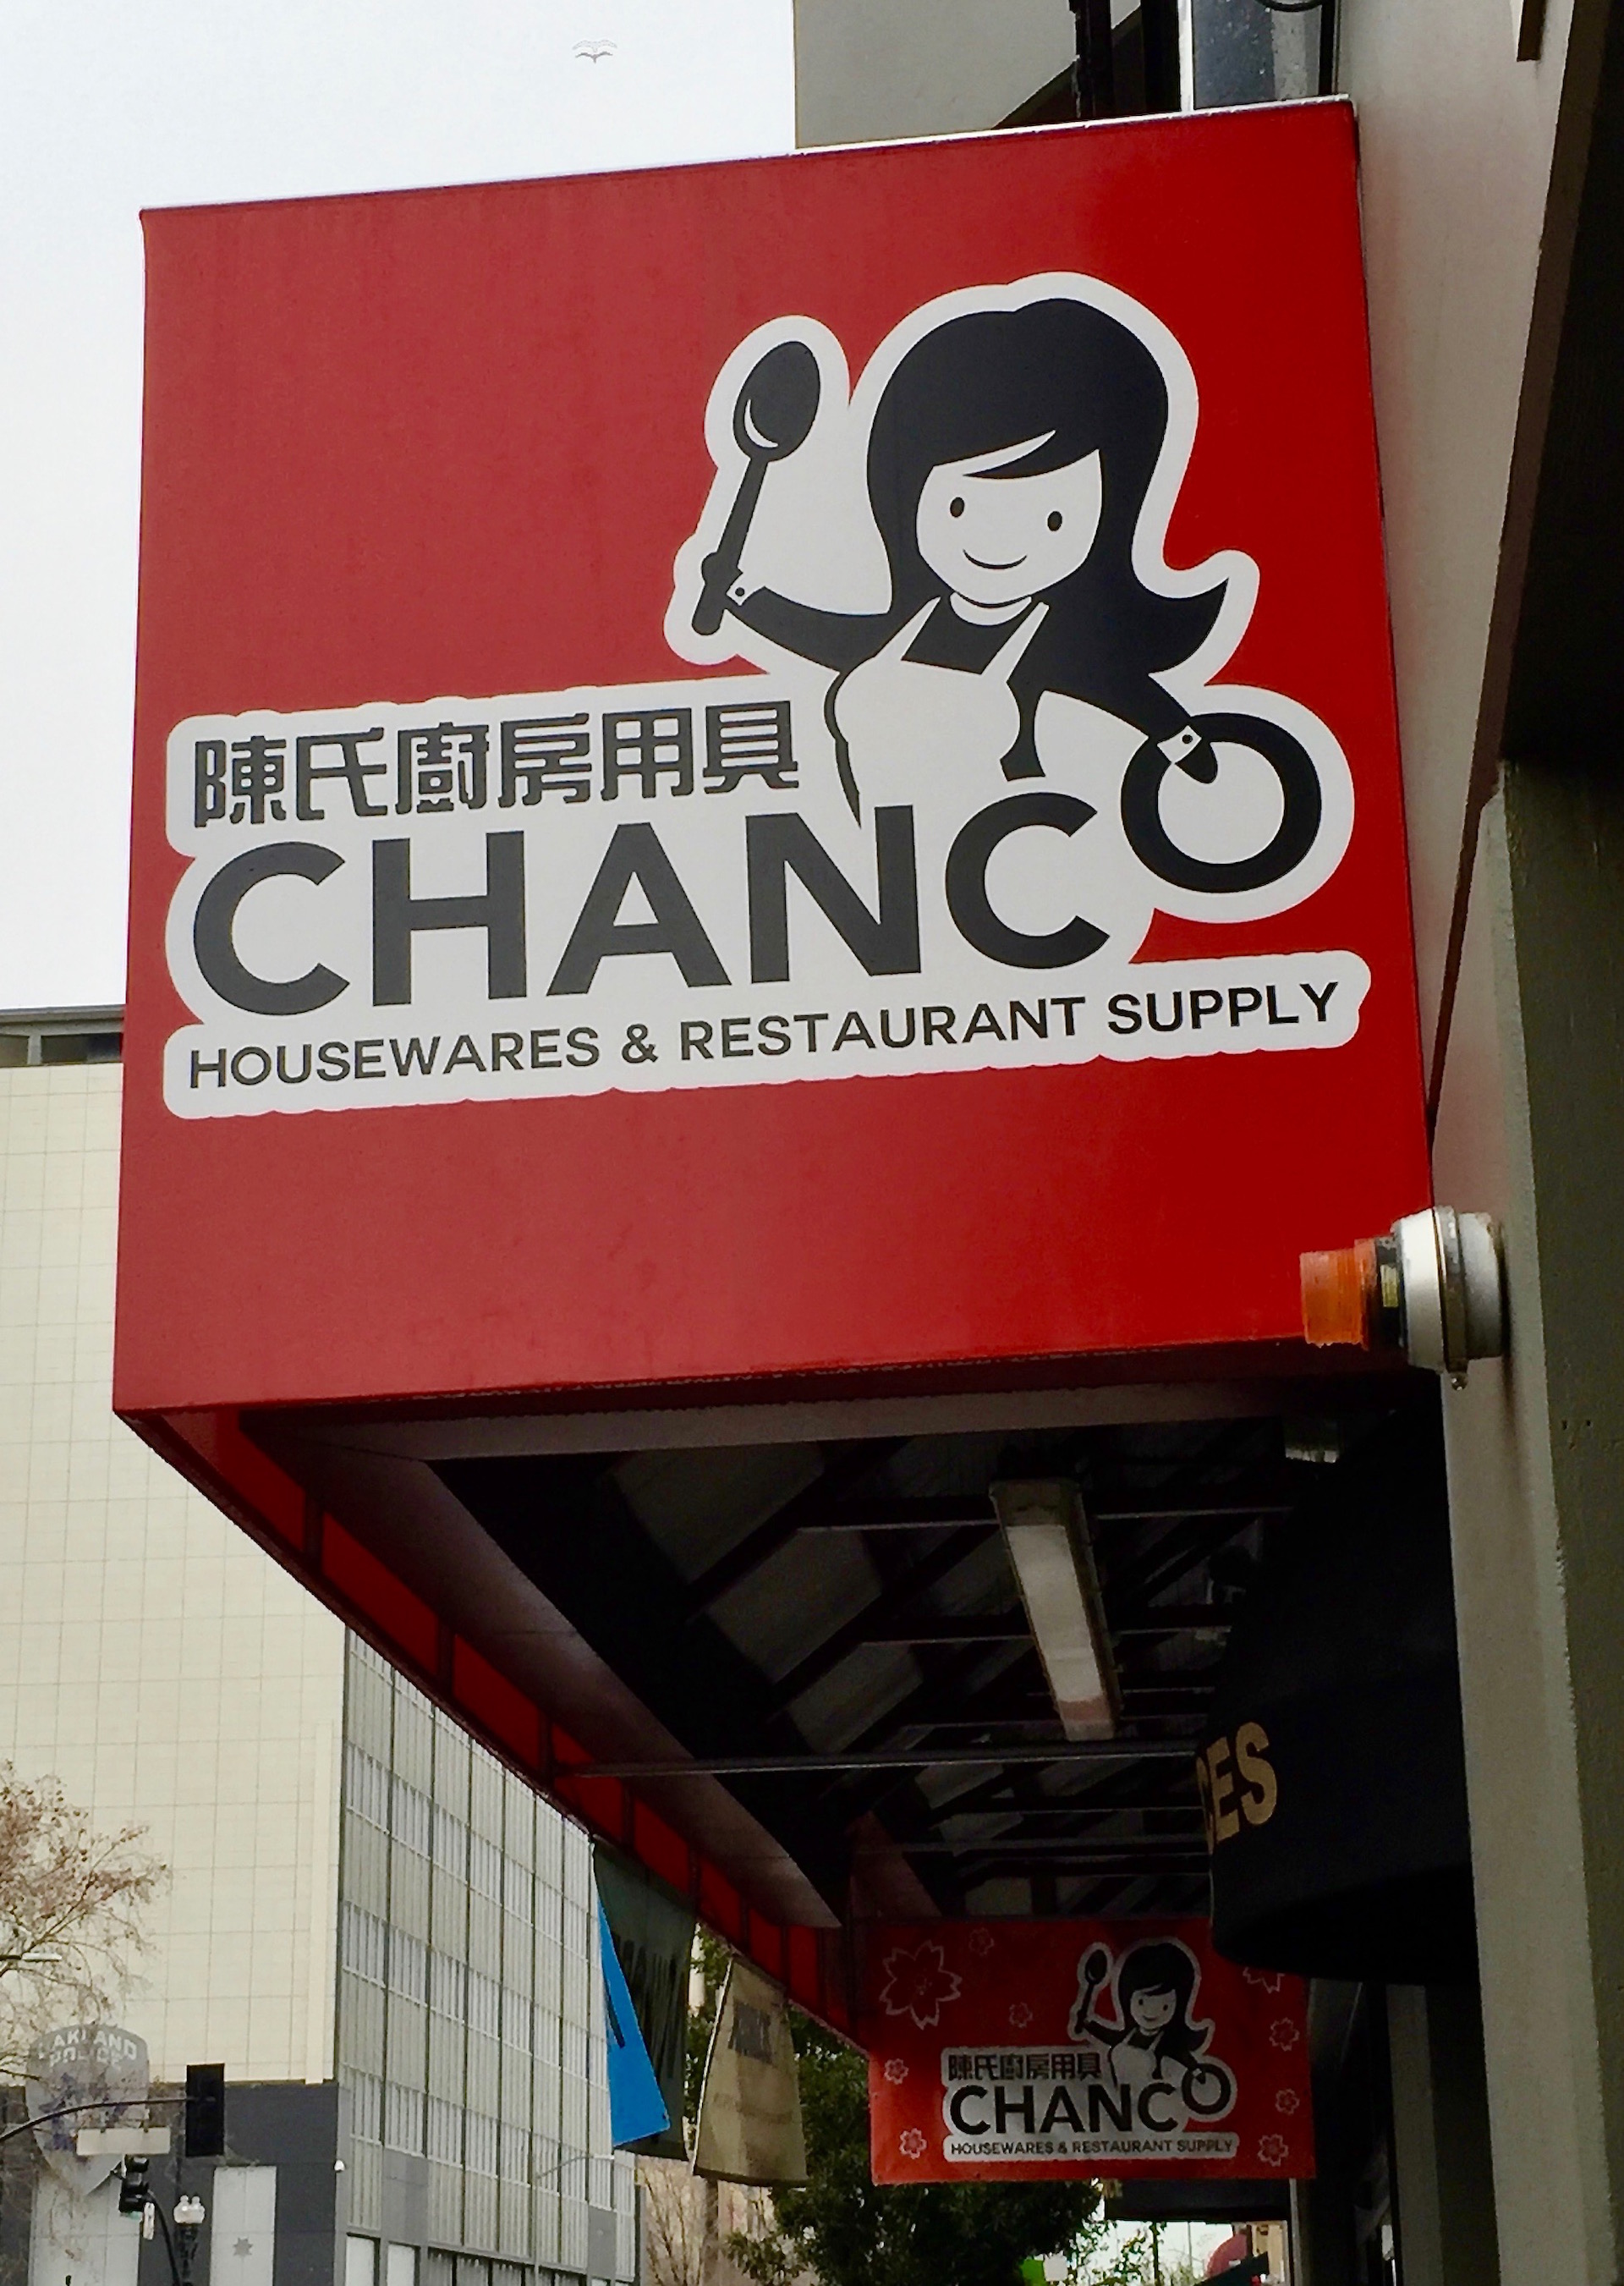 Chanco Housewares in Oakland Chinatown. Photo: Anna Mindess